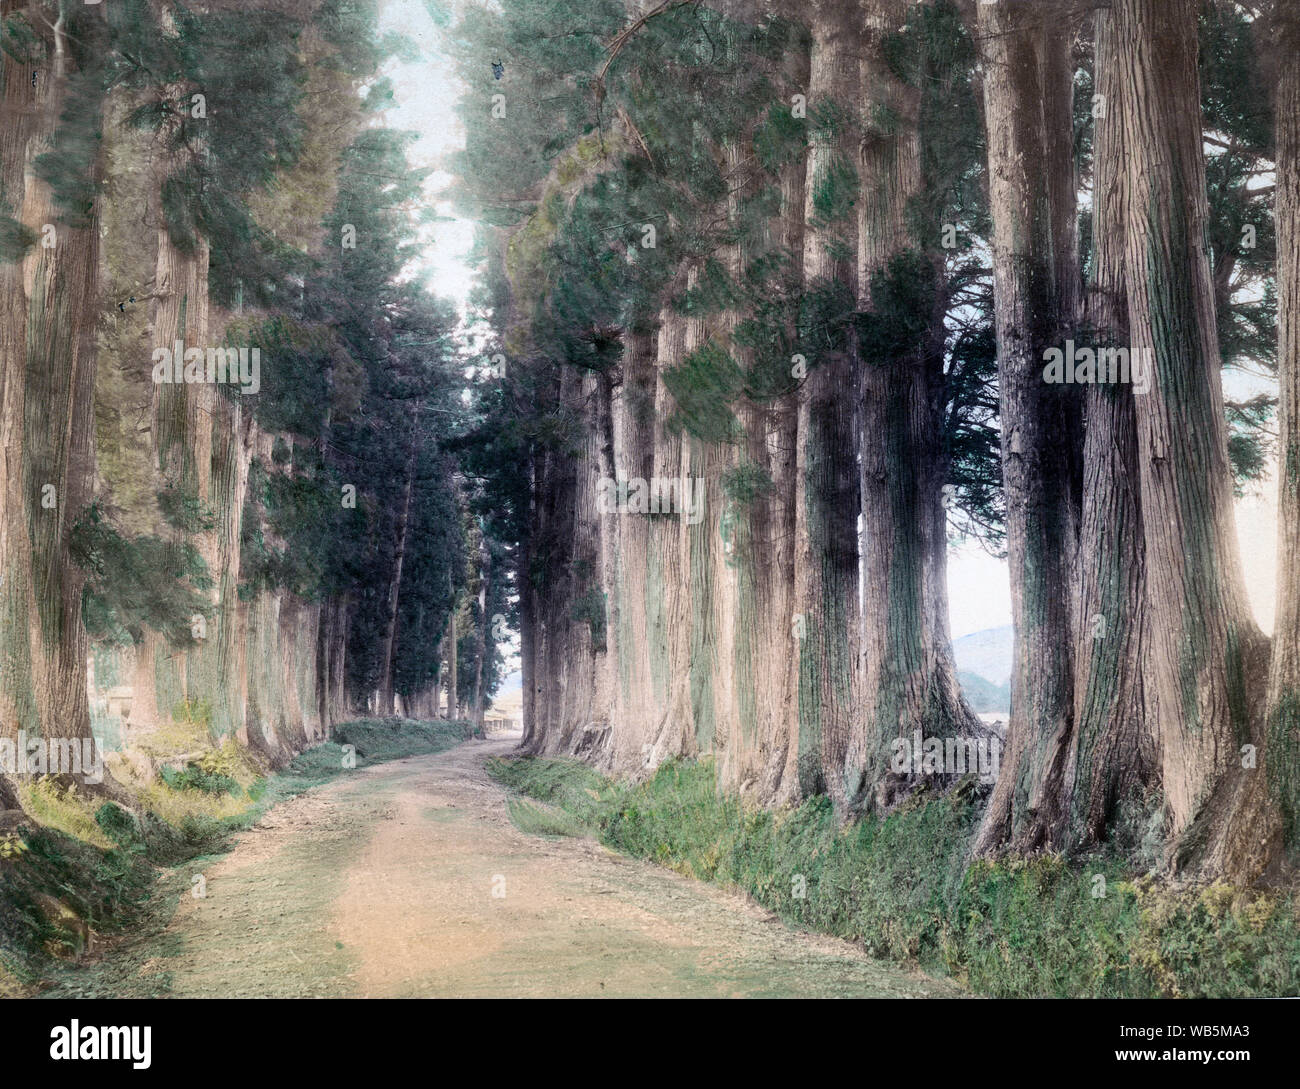 [ 1890s Japan - Nikko Road ] —   The road to Nikko. The cedars were donated by Matsudaira Masatsuna on the 33rd anniversary of the death of Shogun Tokugawa Ieyasu.  Three highways lined with trees lead to Nikko: Onari (Nikko)-kaido, Reiheishi-kaido, and Aizunishi-kaido. The combined distance of the three highways was approximately 37km, and most of them were within the city of Imaichi near Nikko.  19th century vintage albumen photograph. Stock Photo